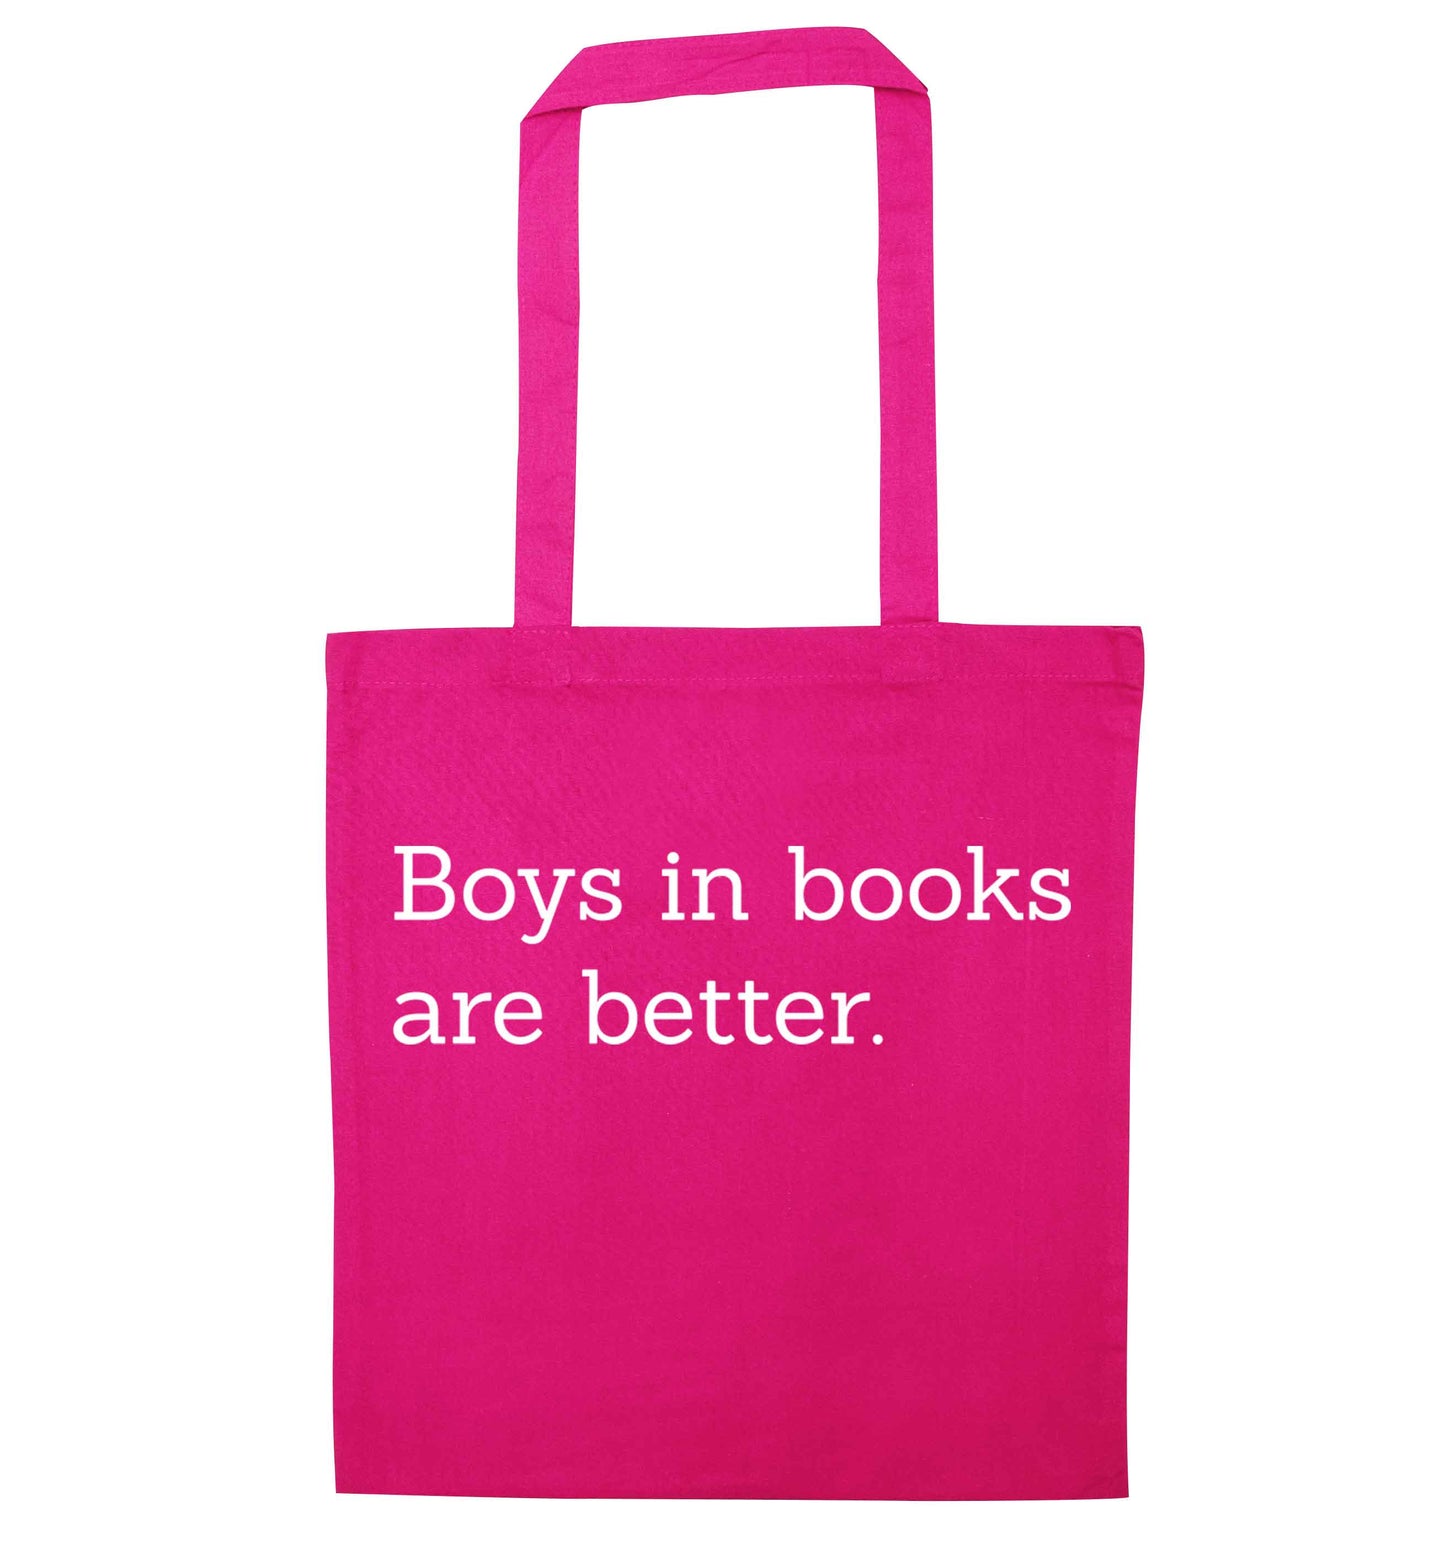 Boys in books are better pink tote bag